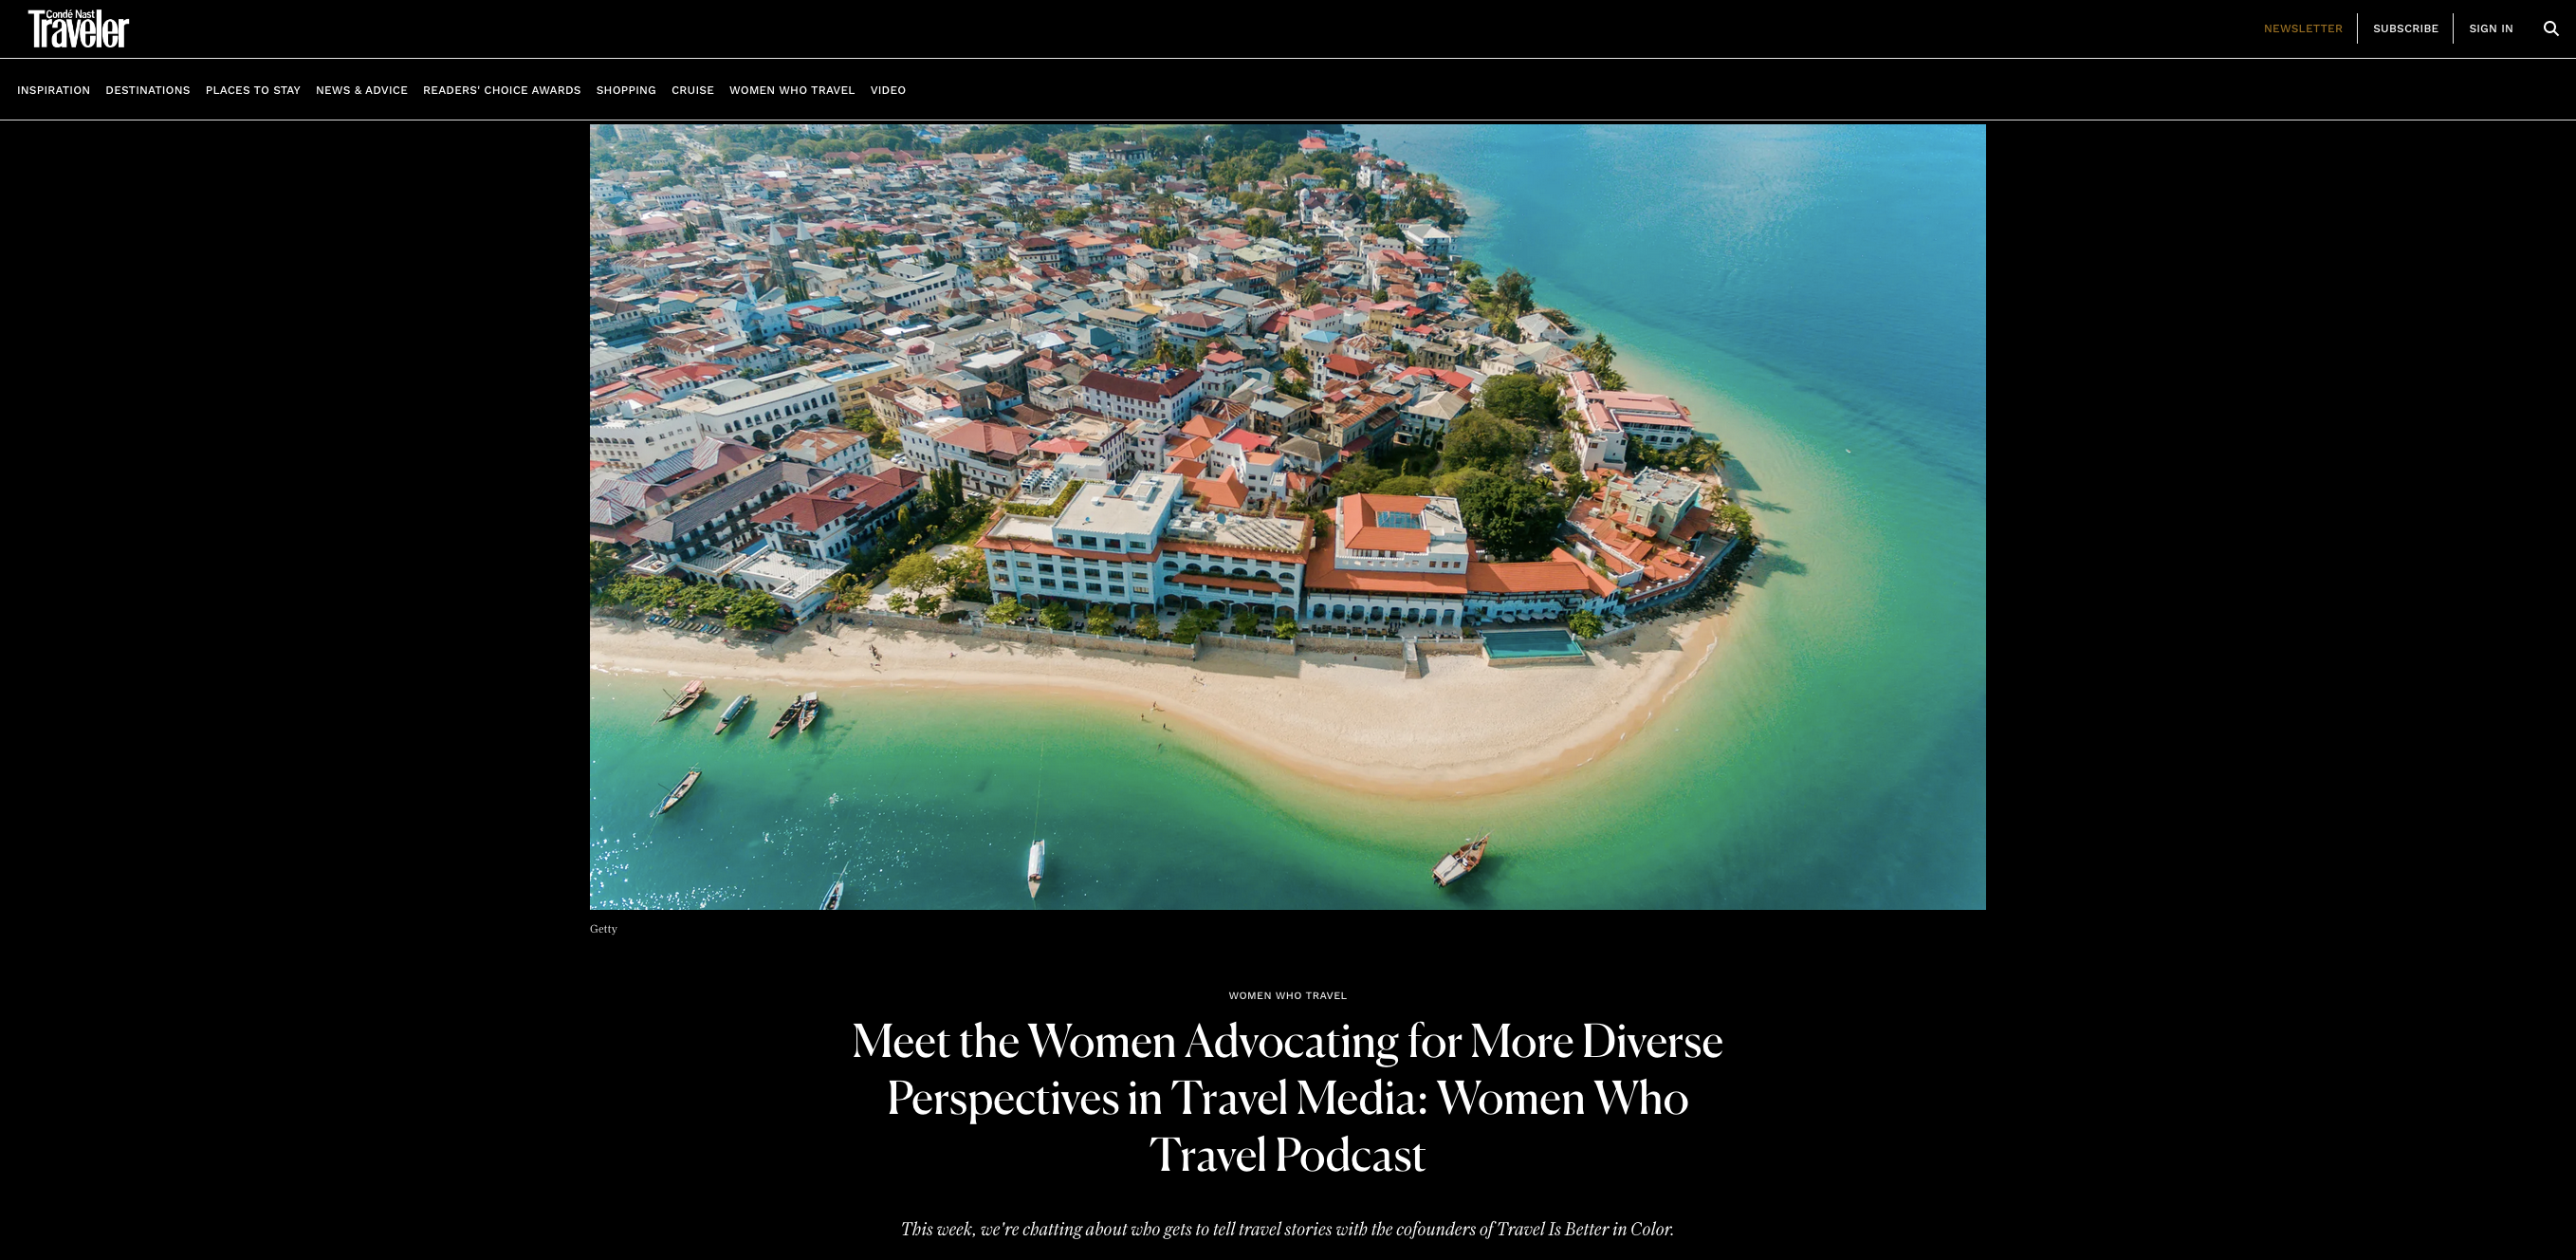 Condé Nast Traveler: Meet the Women Advocating for More Diverse Perspectives in Travel Media